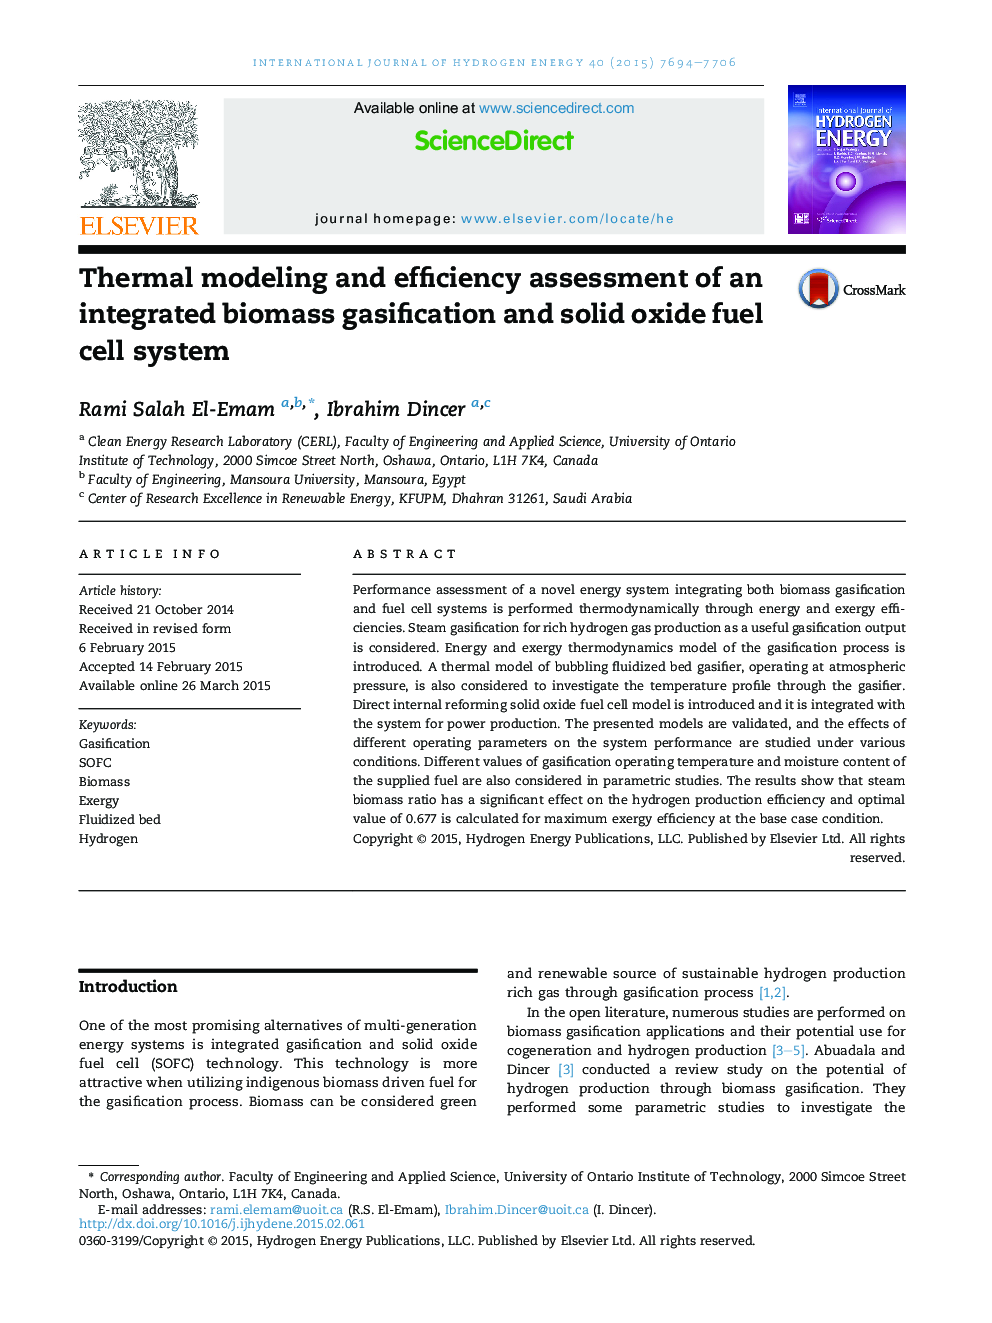 Thermal modeling and efficiency assessment of an integrated biomass gasification and solid oxide fuel cell system